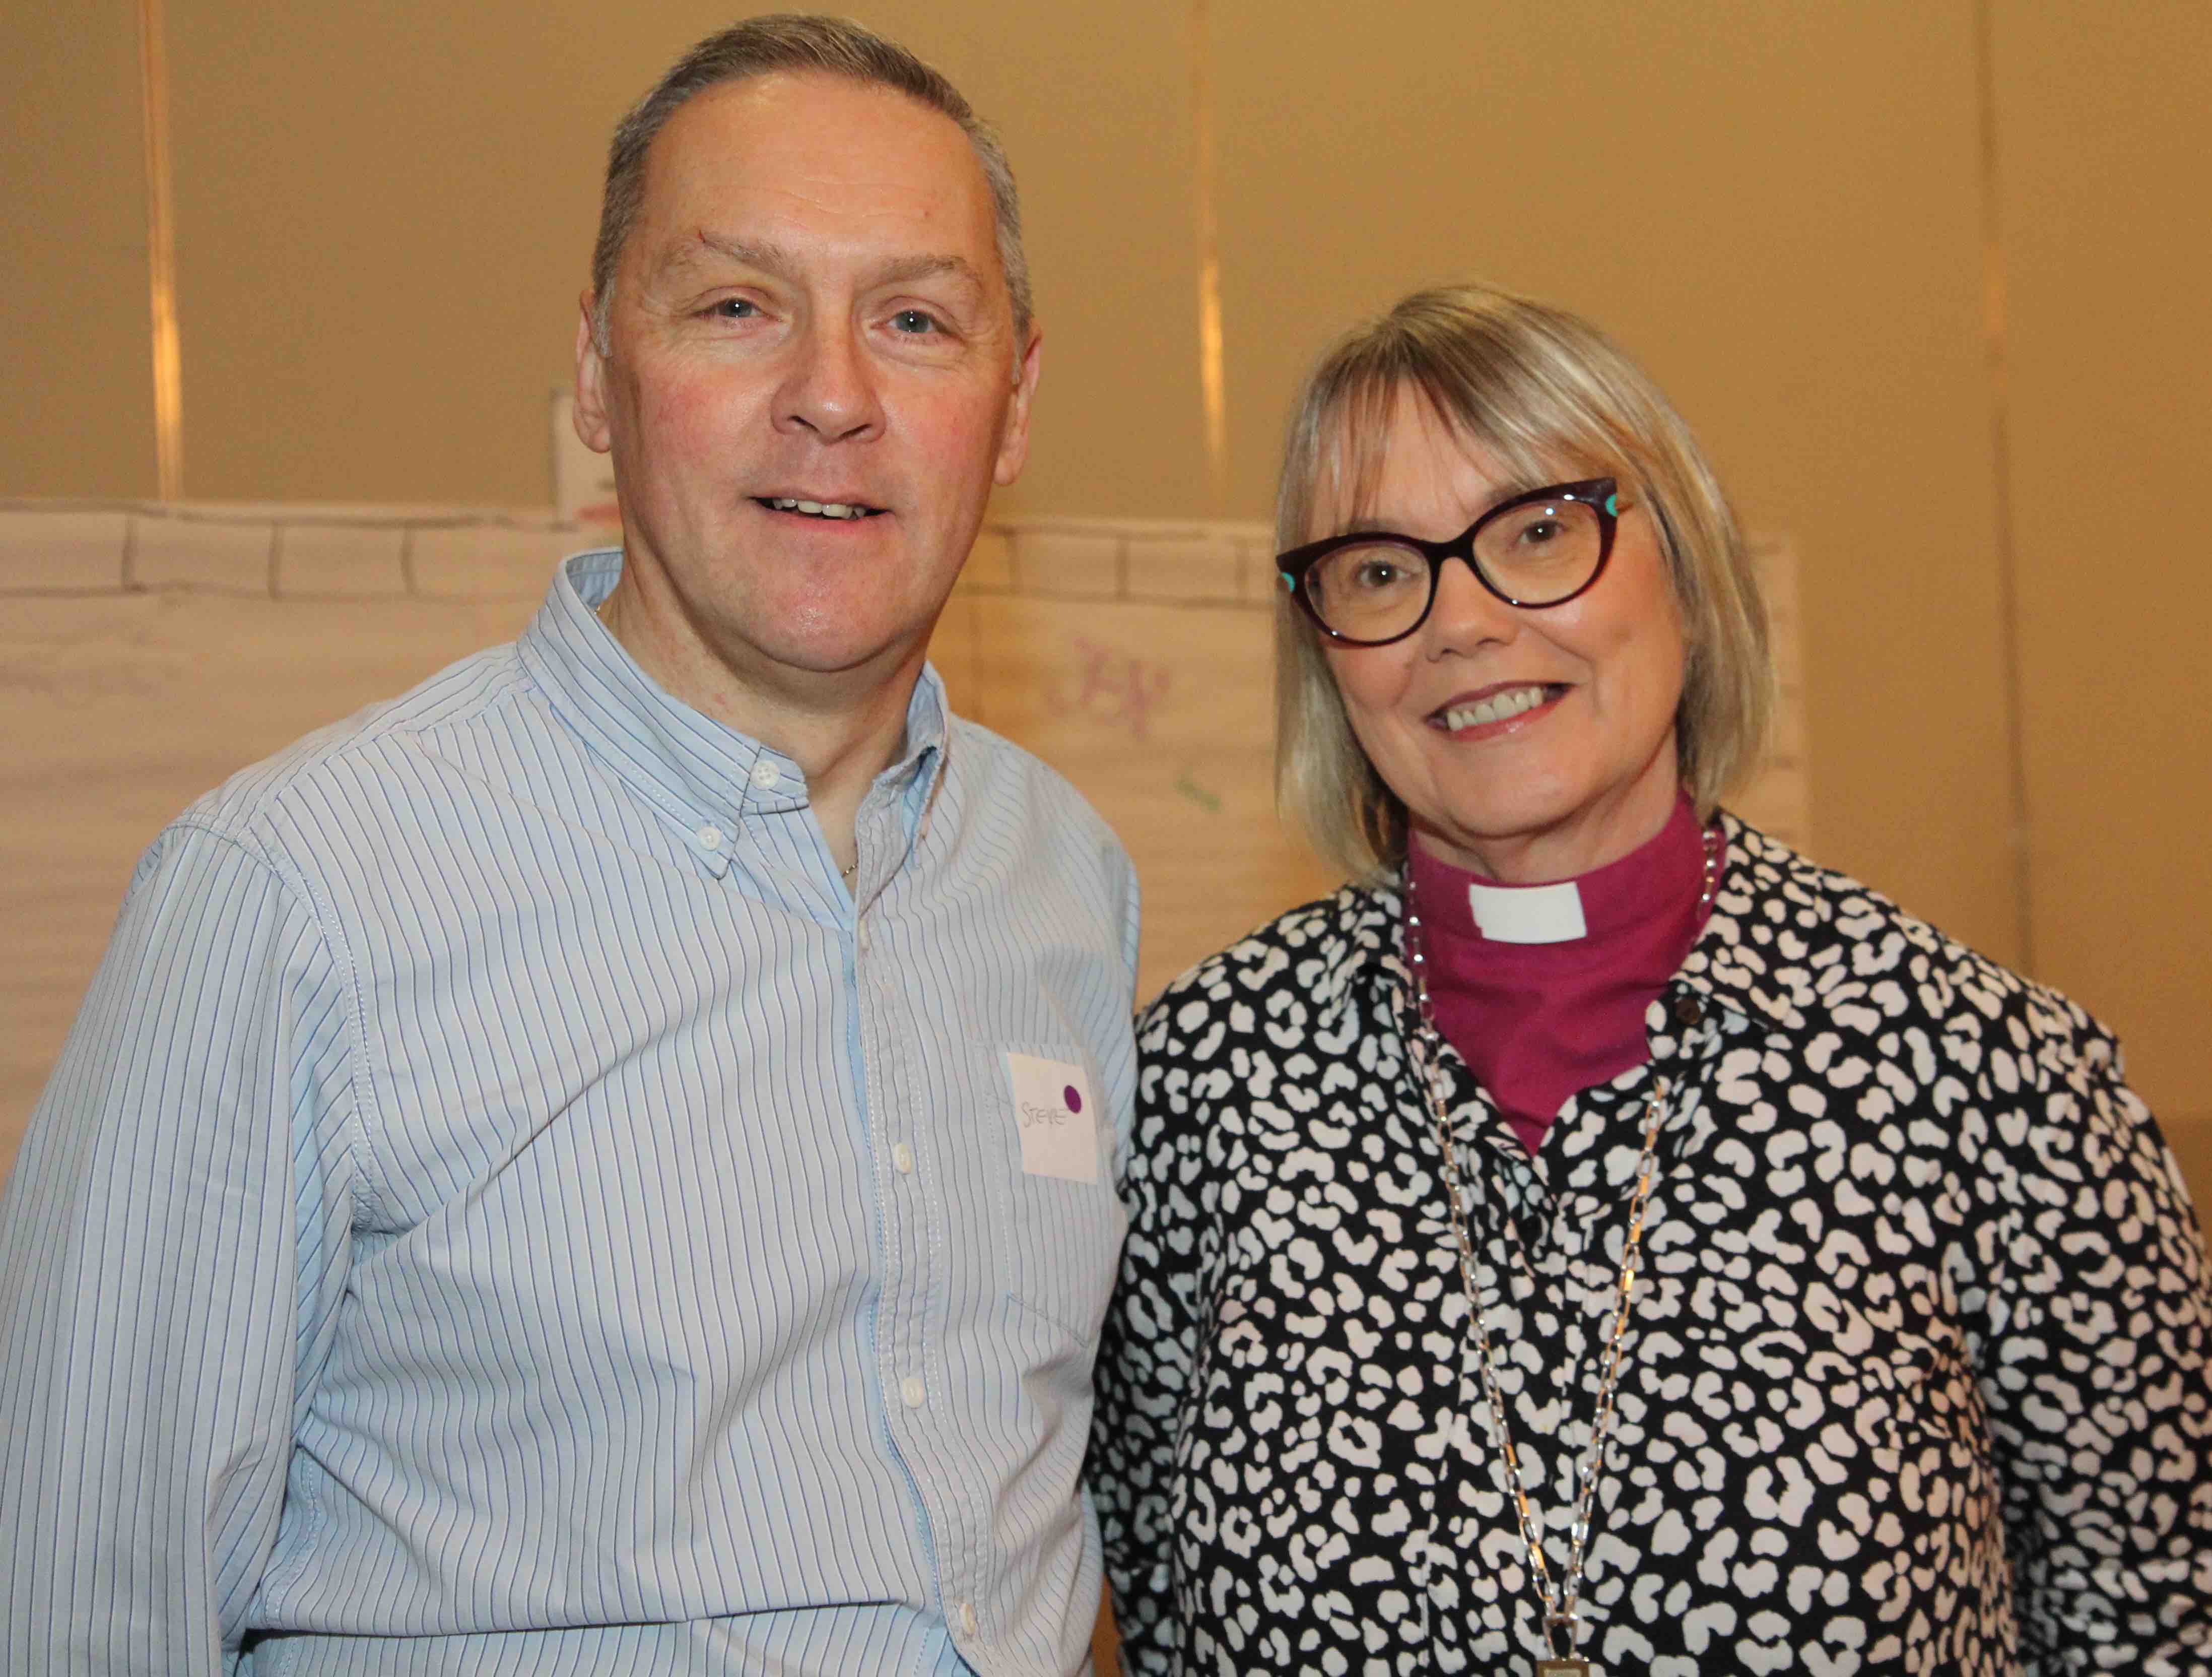 CIYD Youth Ministry Development Officer Steve Grasham with CIYD Chairperson Bishop Pat Storey at the Church of Ireland Youth Forum.